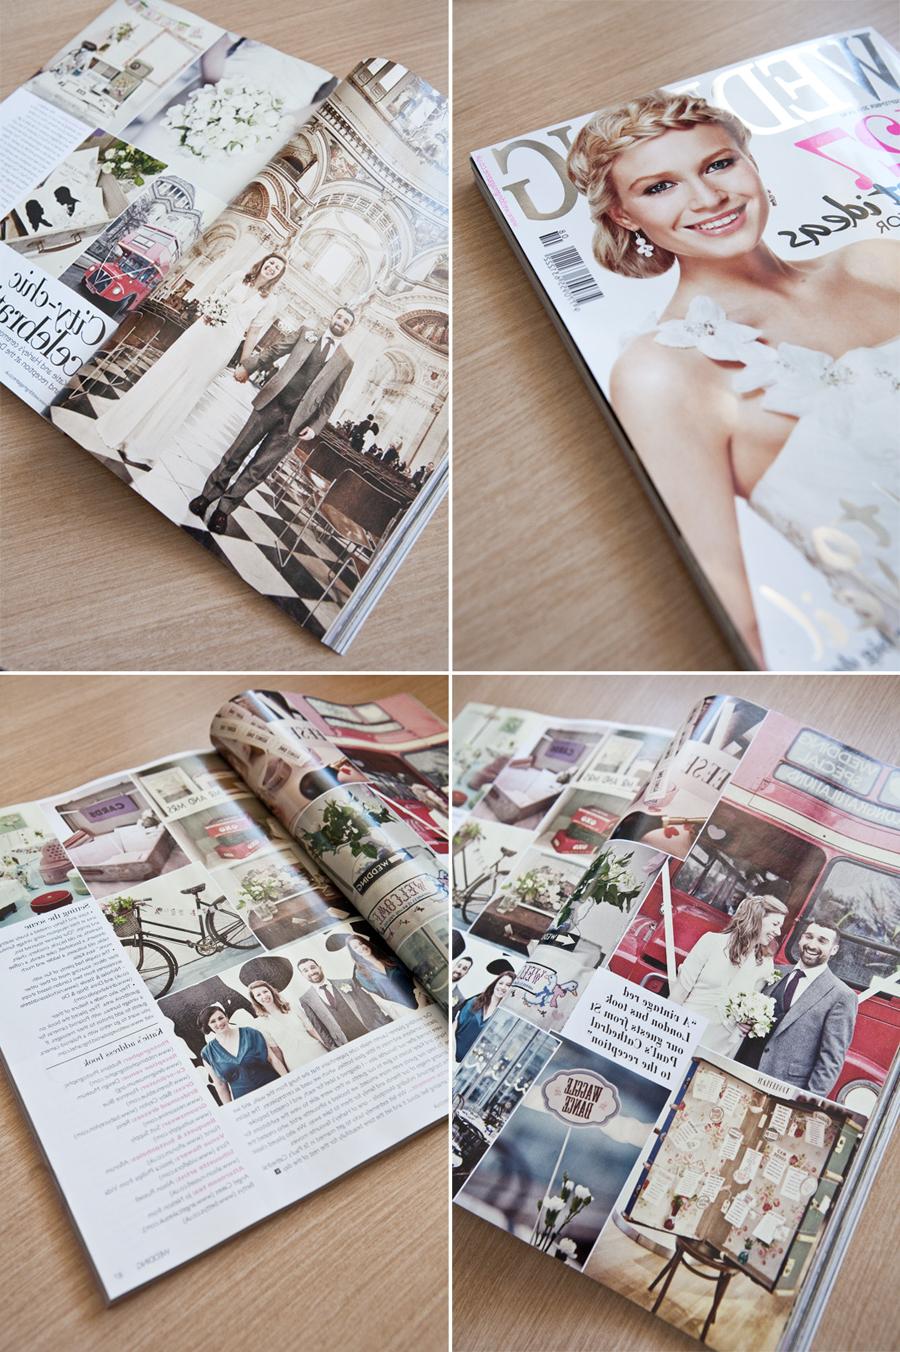 I have been featured in Wedding Magazine again   this time TWO double page